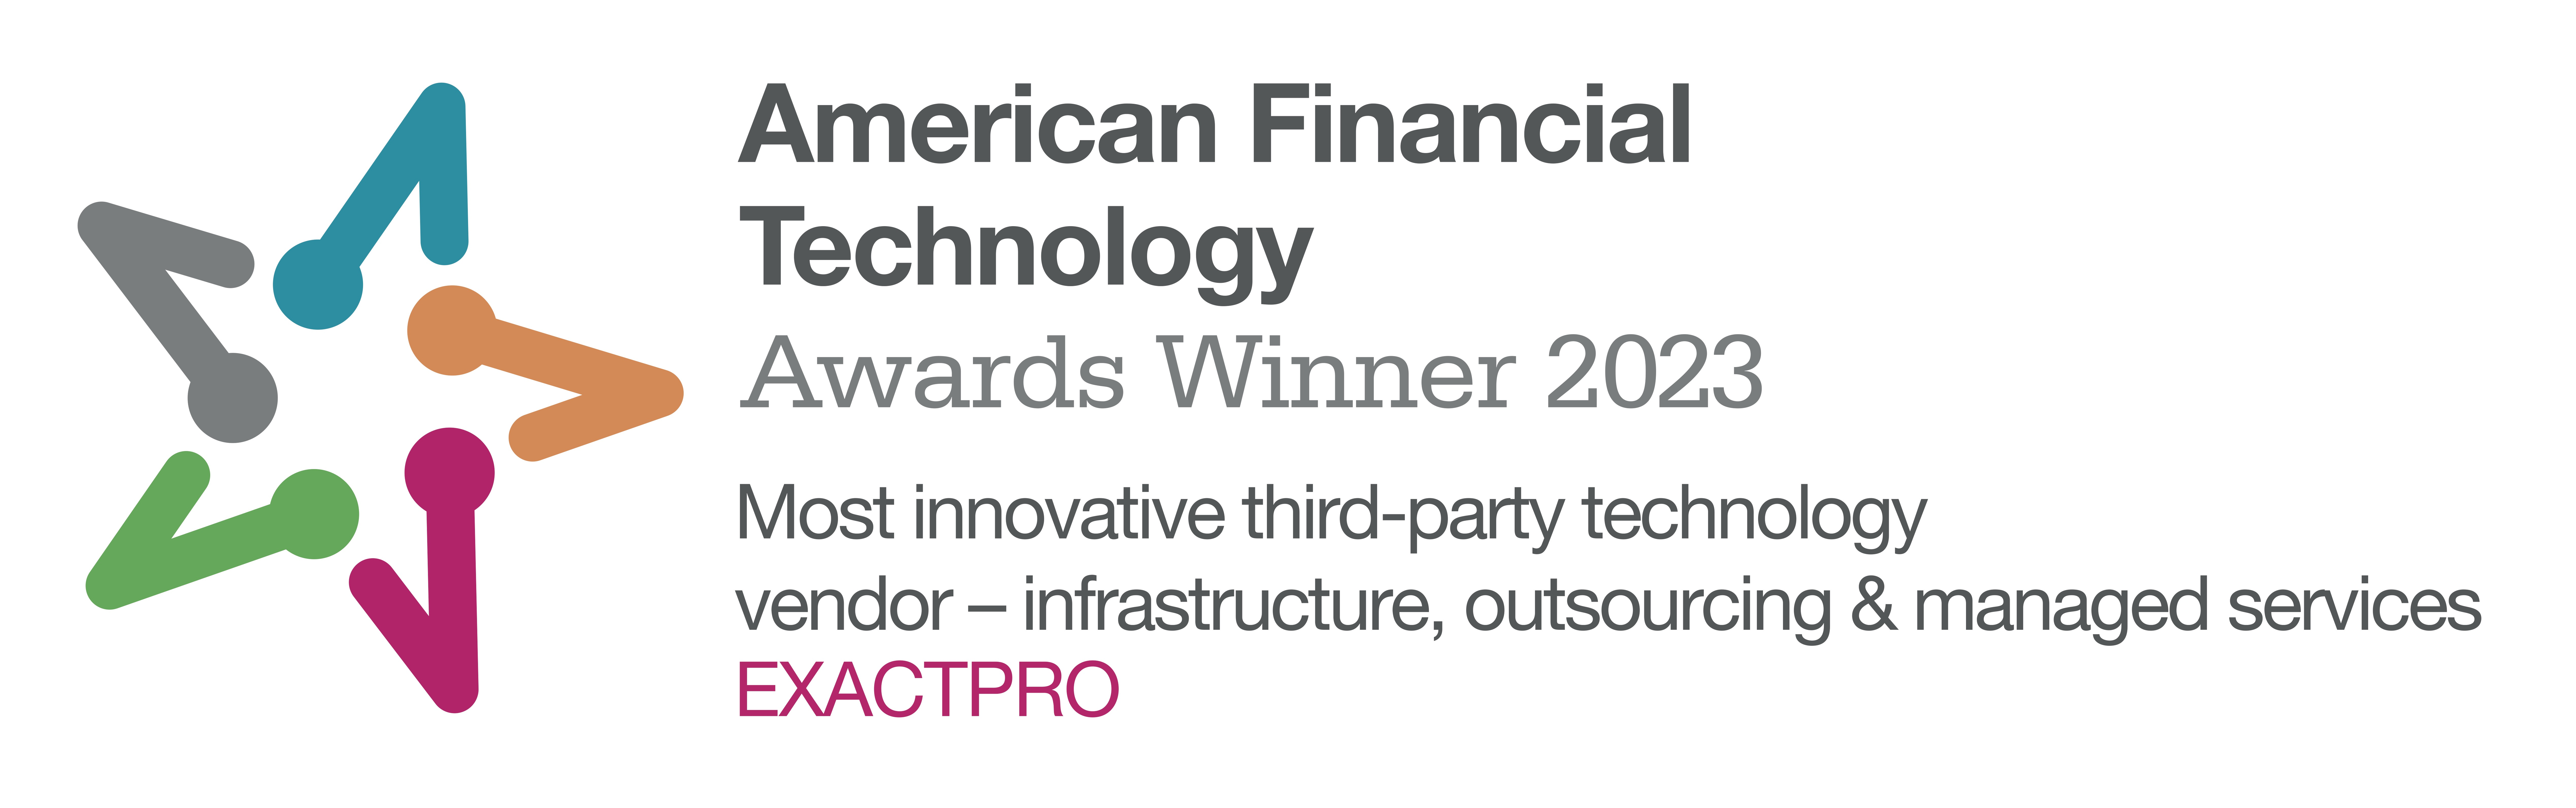 
<span>Exactpro wins 'Most Innovative Third-party Technology Vendor – Infrastructure, Outsourcing, and Managed Services' in the American Financial Technology Awards 2023</span>
